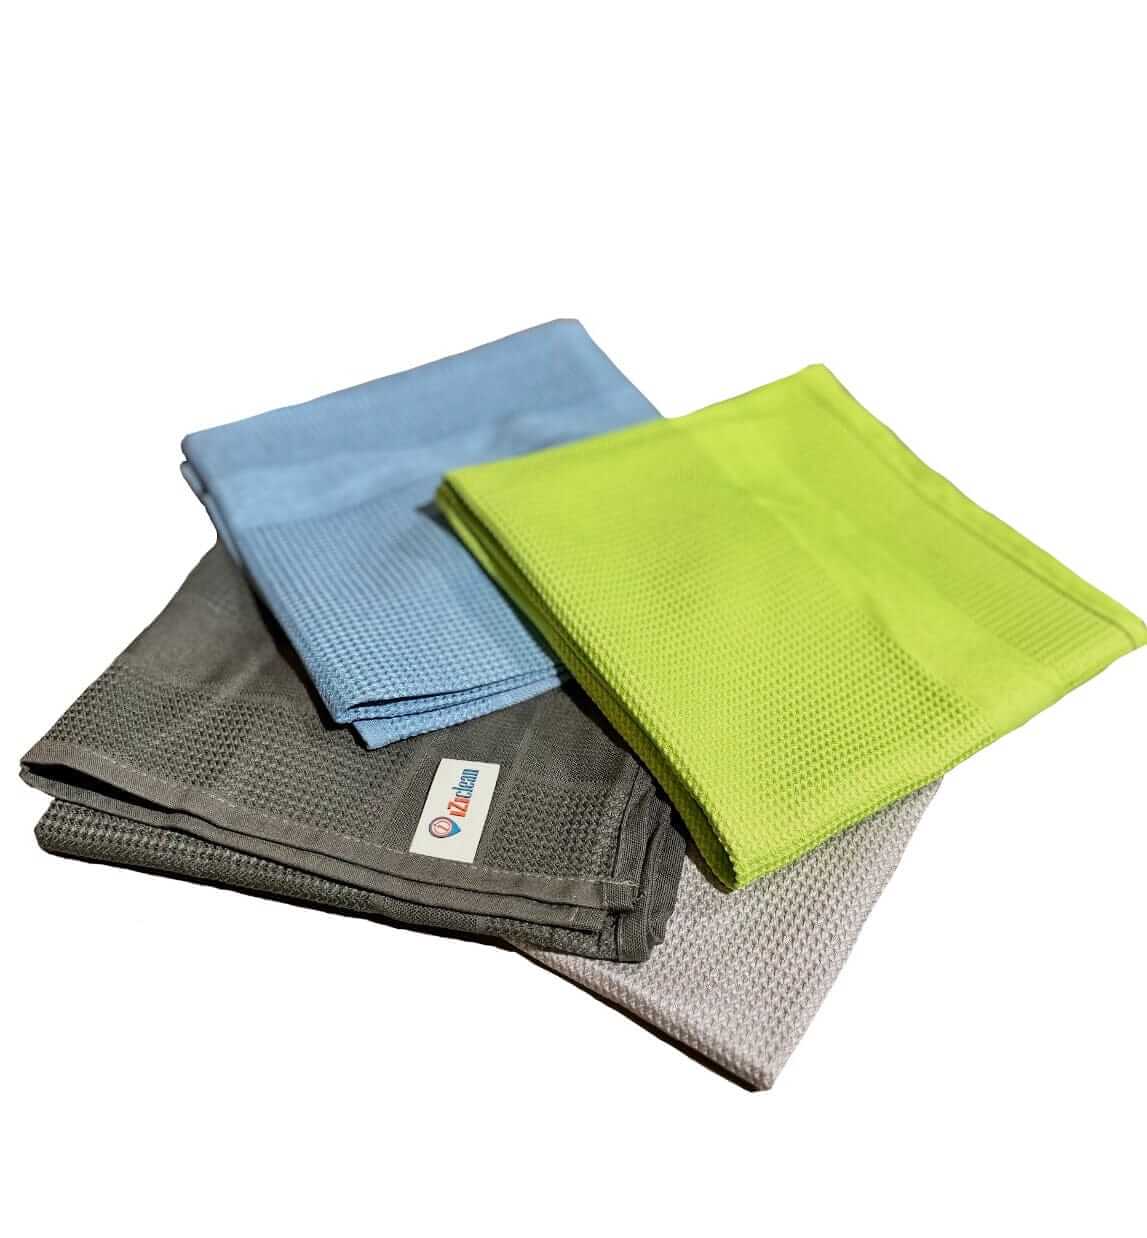 Reseller Package 144 pieces - iZi-Clean Wonder Cloth